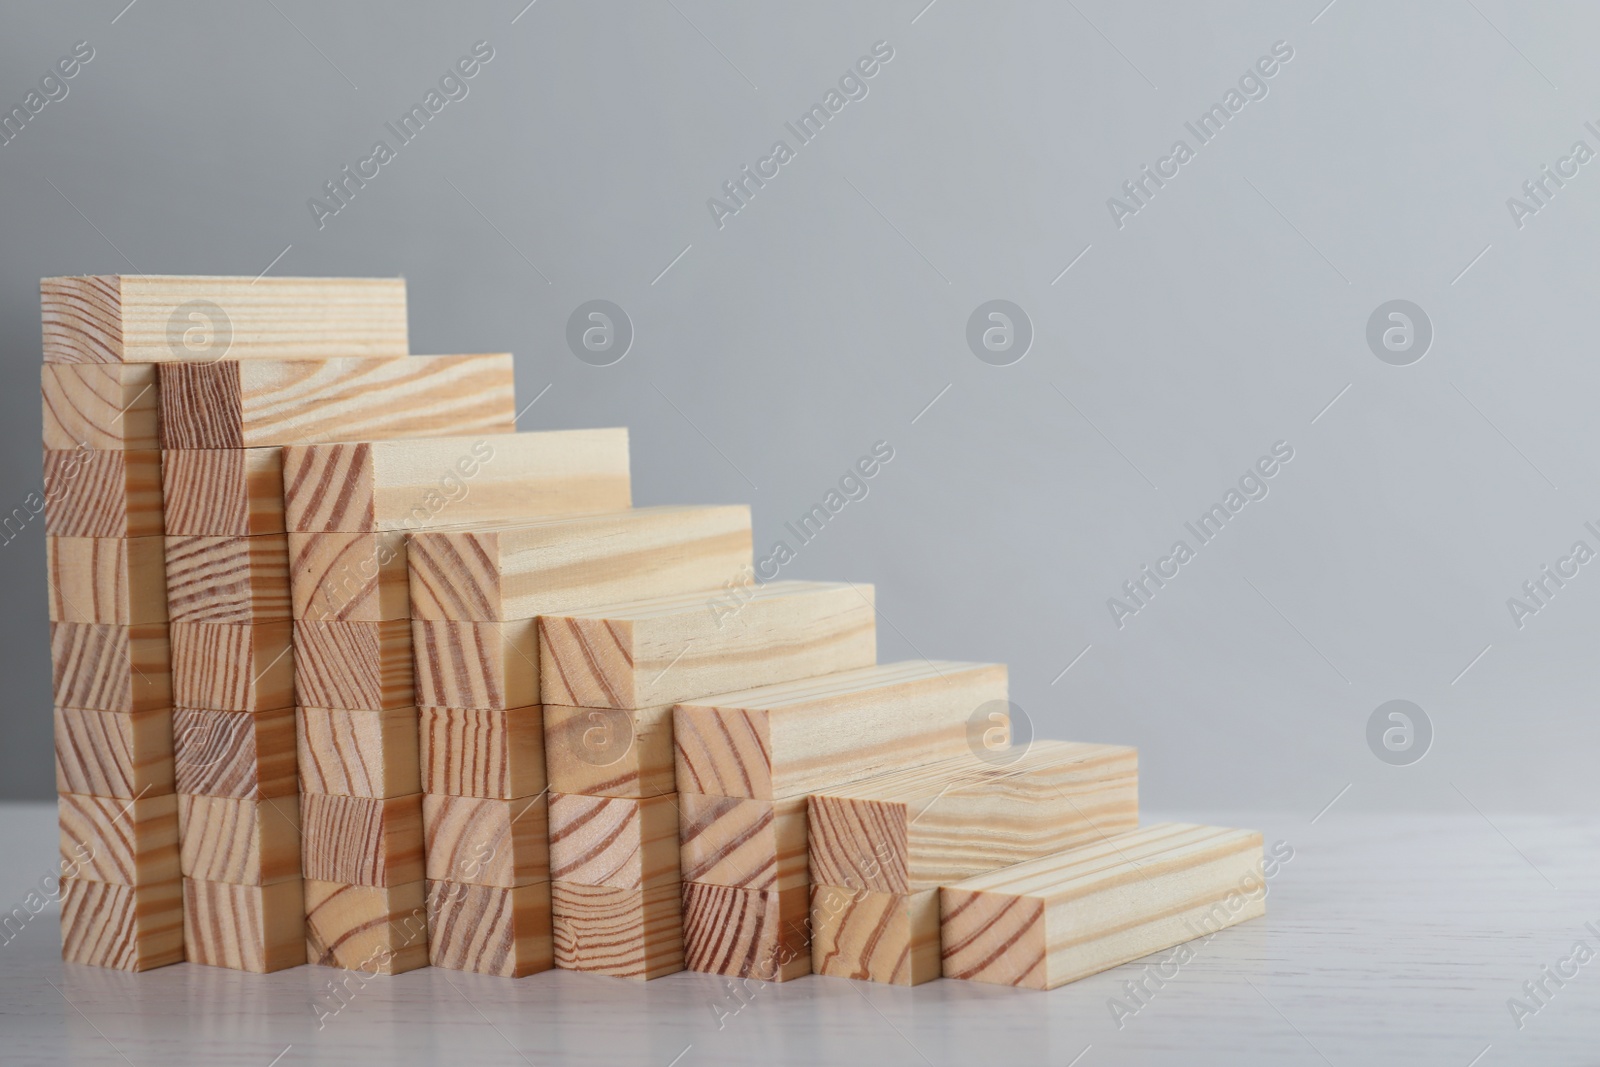 Photo of Steps made with wooden blocks on light background, space for text. Career ladder